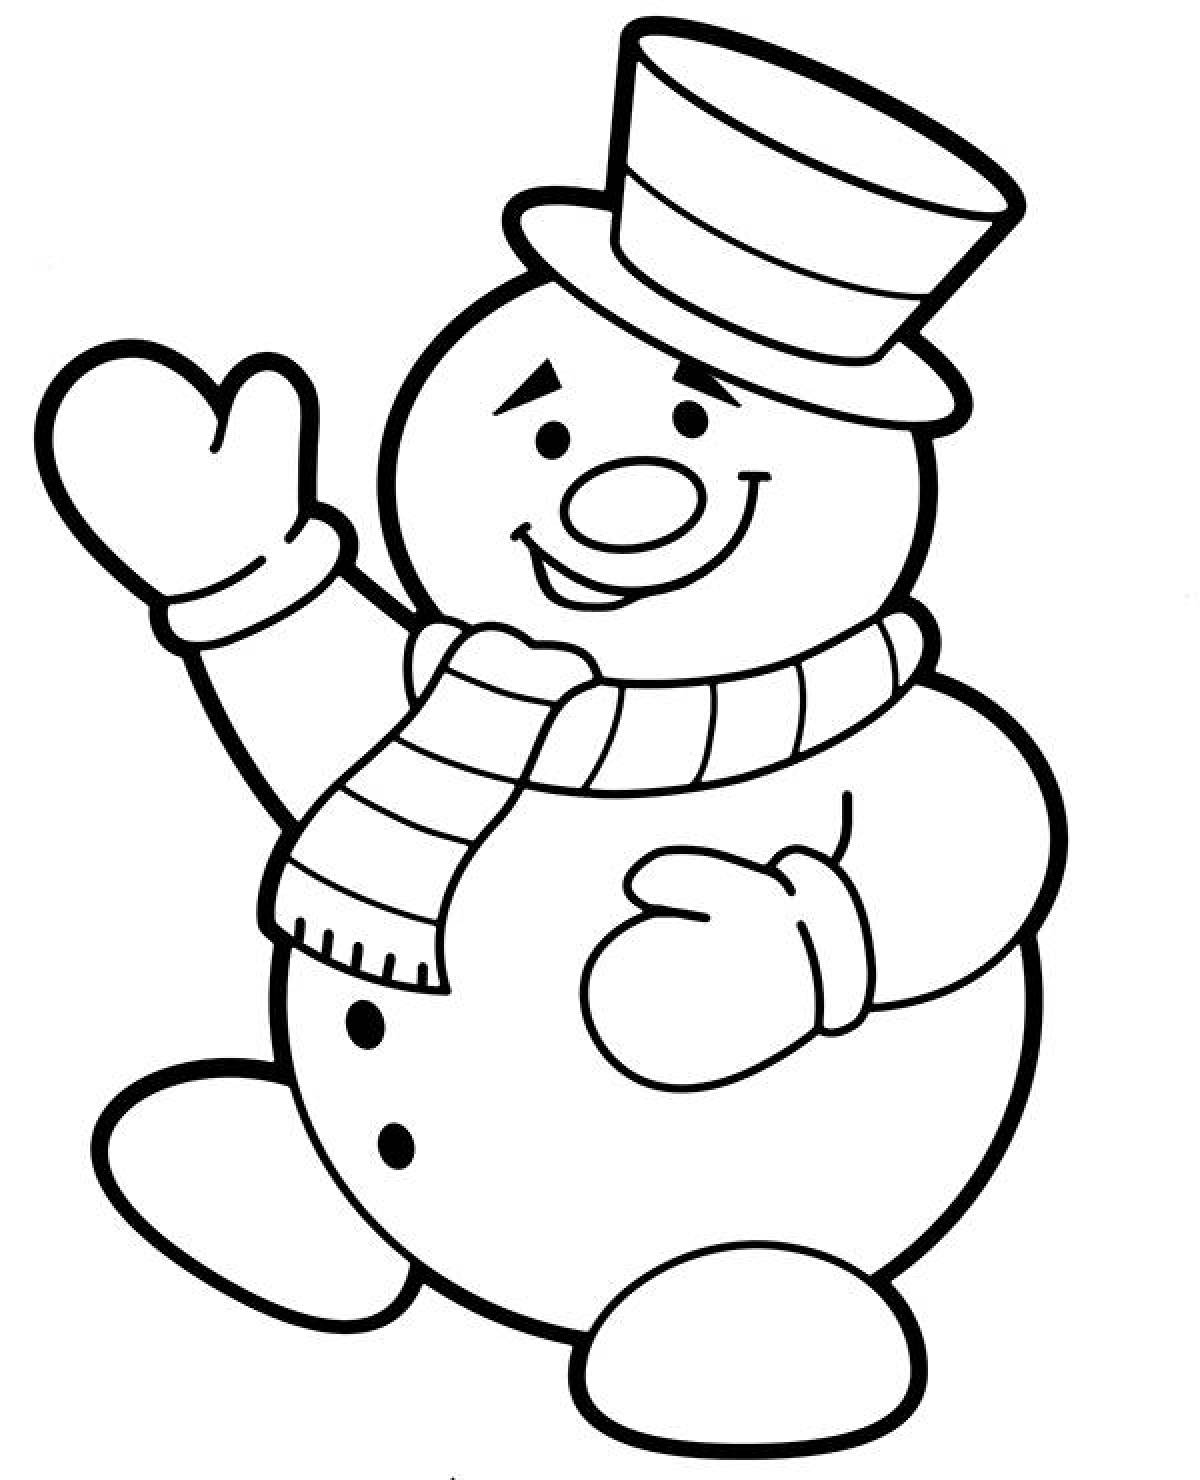 Dazzling snowman coloring page for kids